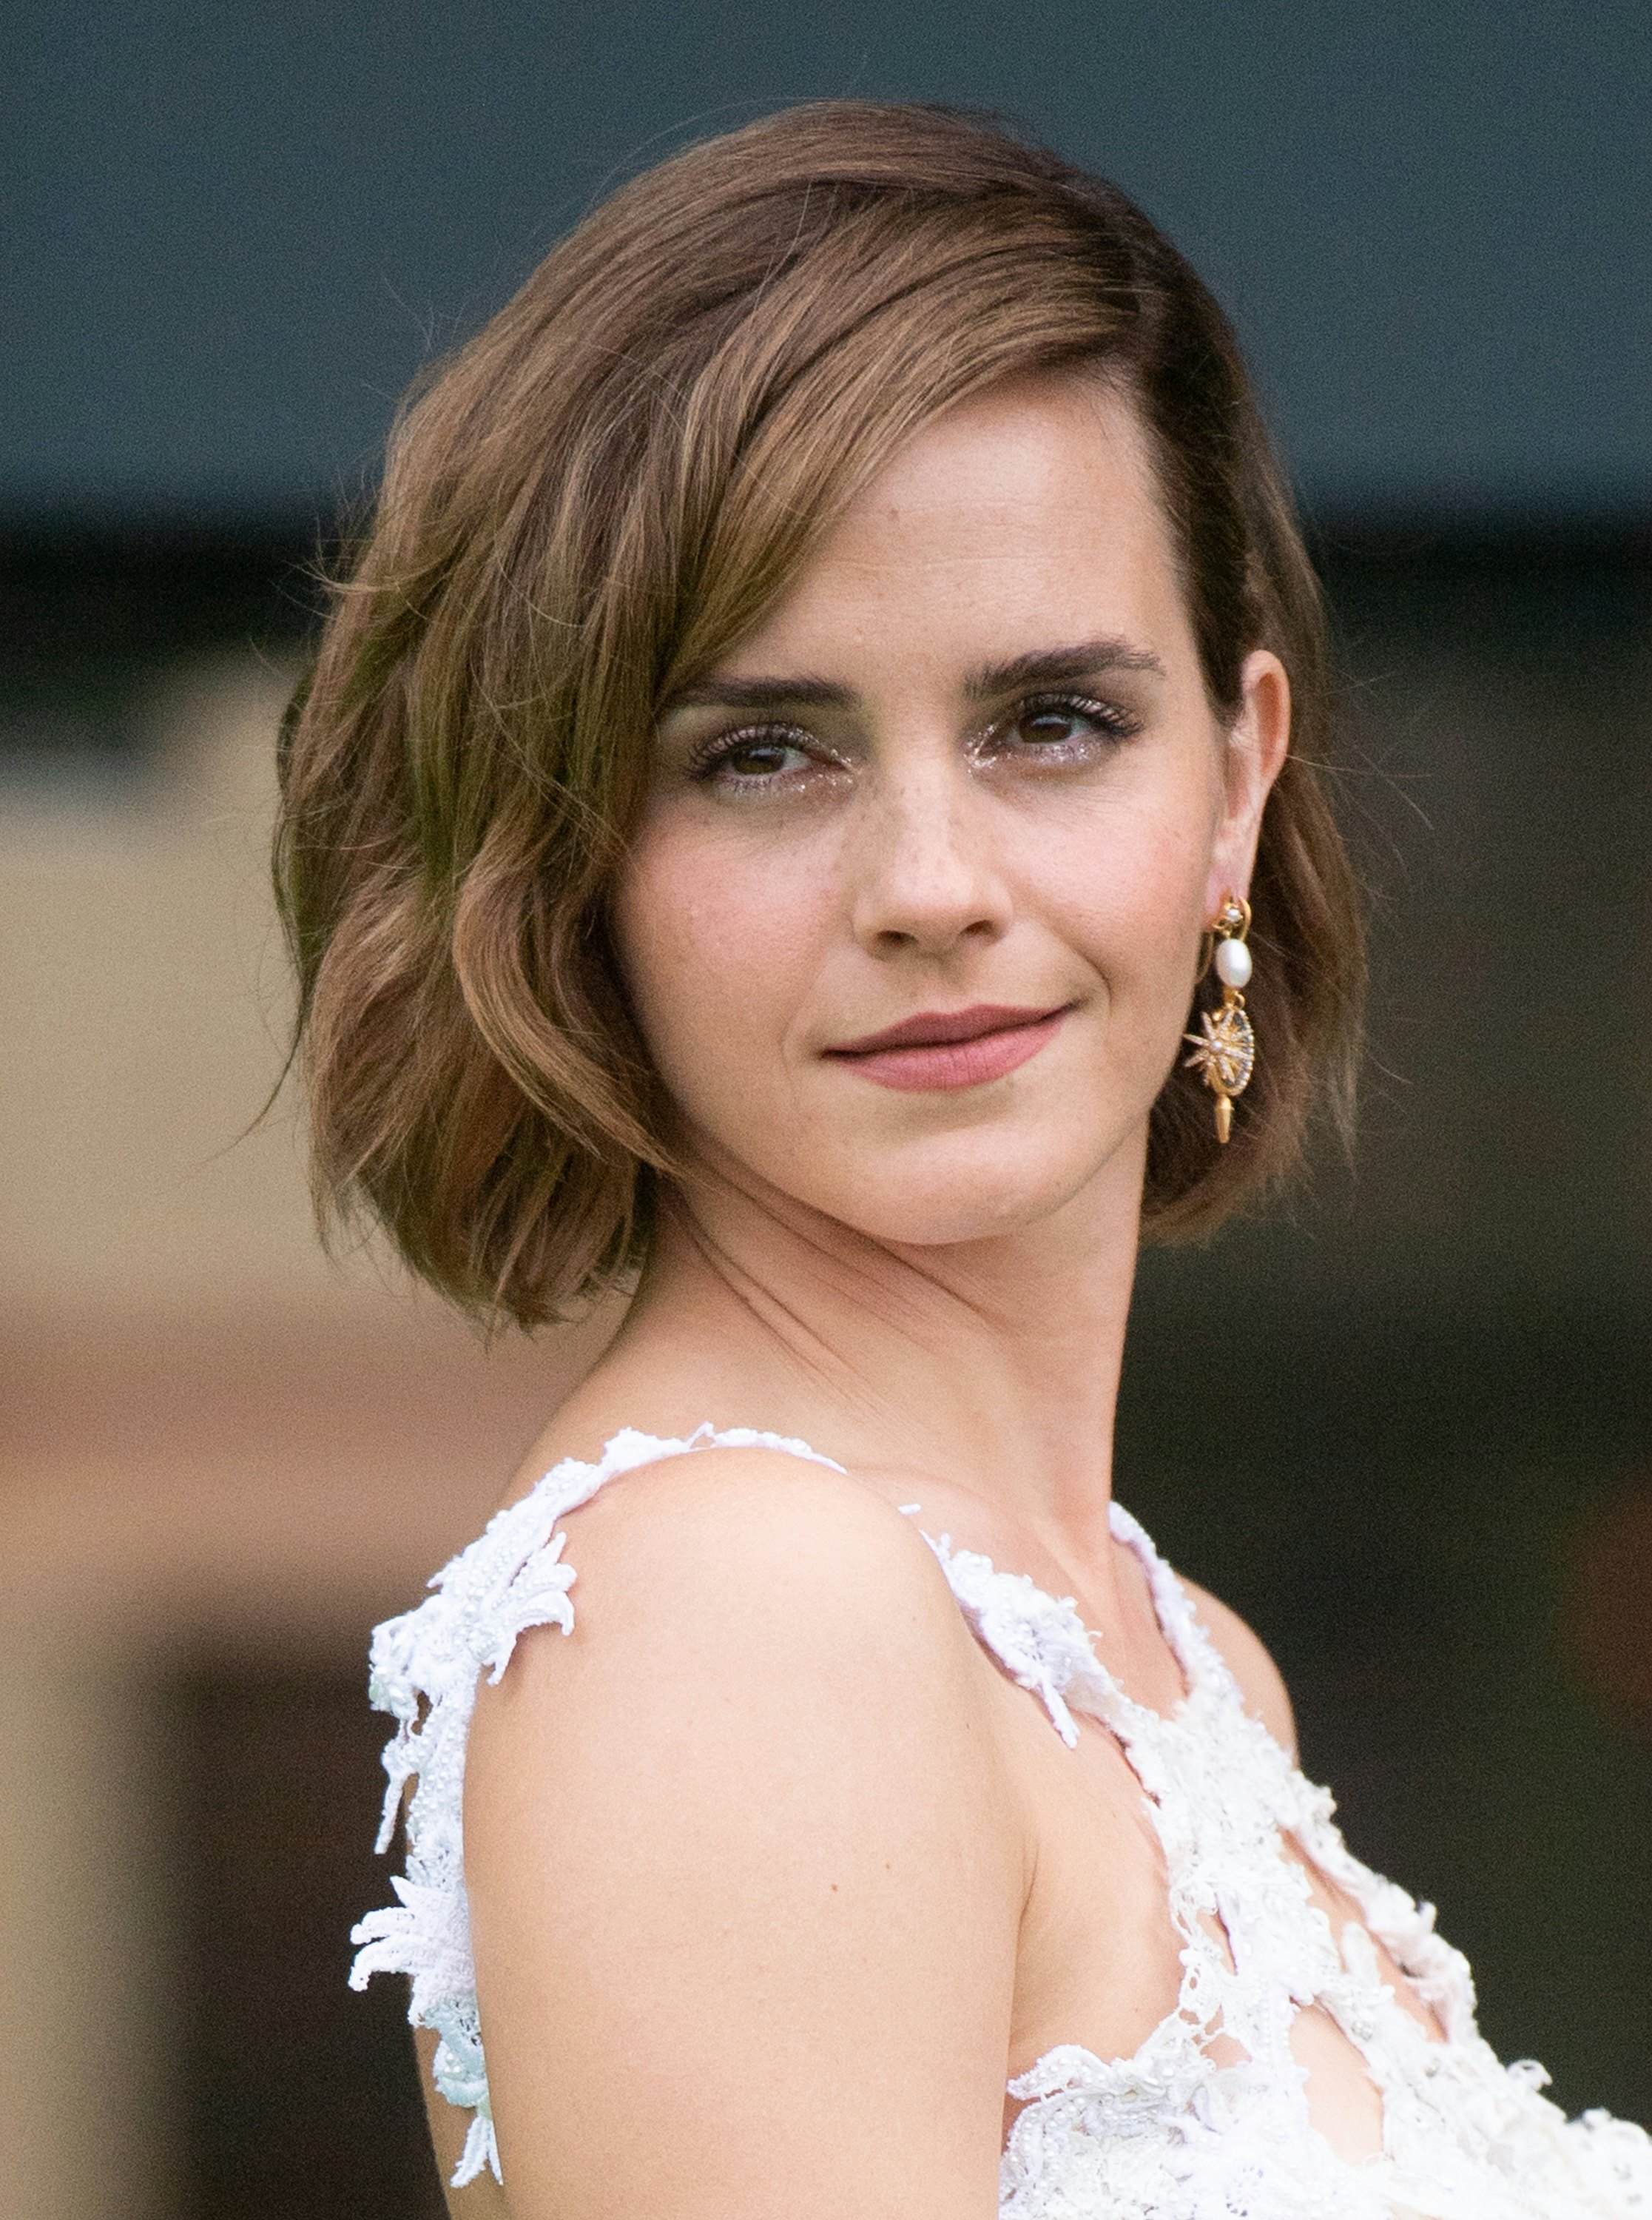 Emma Watson with her hair cut boyish short and around her ears in a pixie